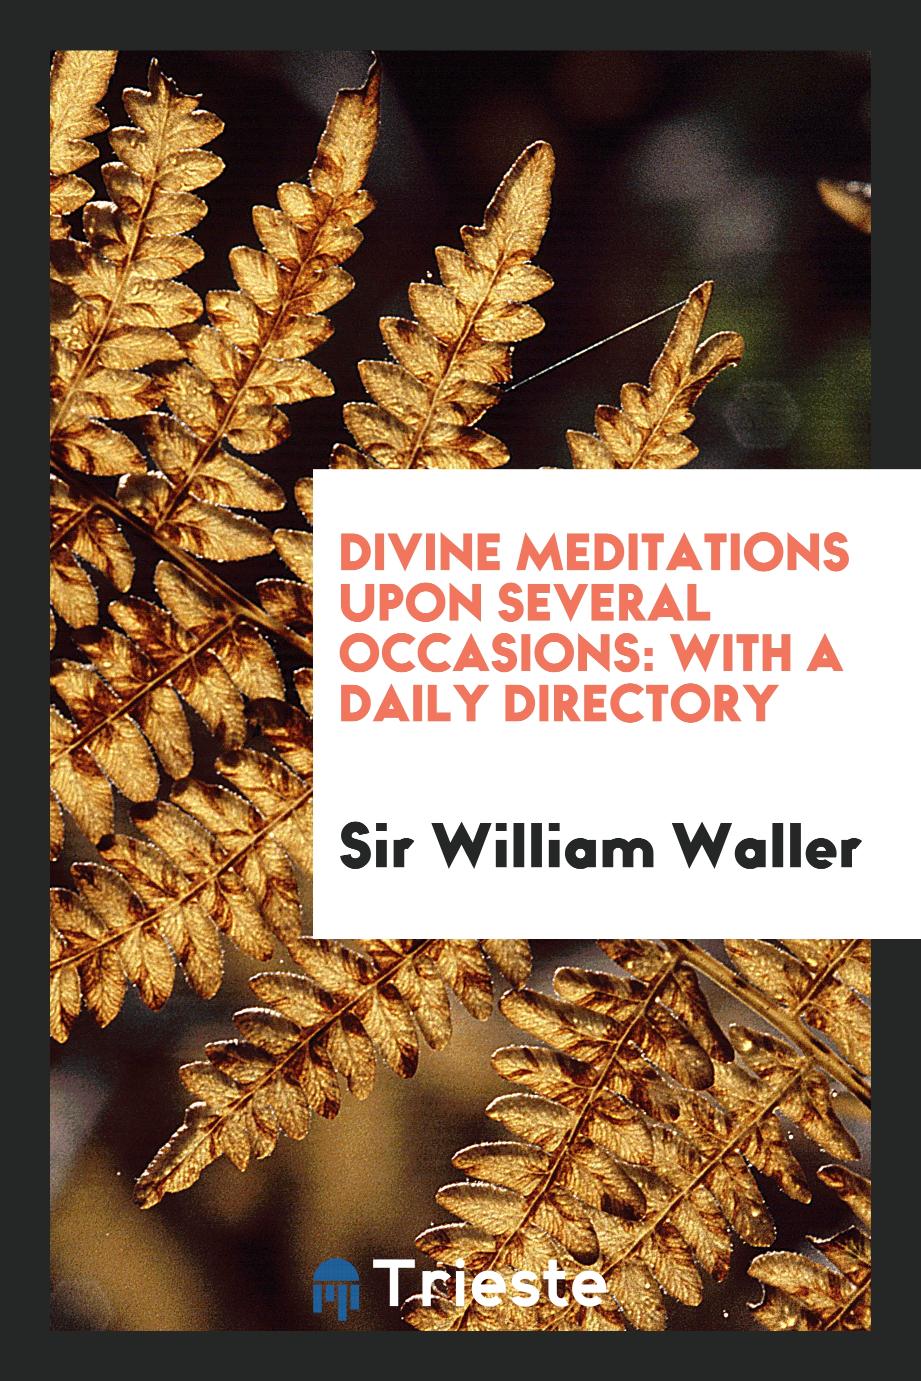 Divine Meditations upon Several Occasions: With a Daily Directory